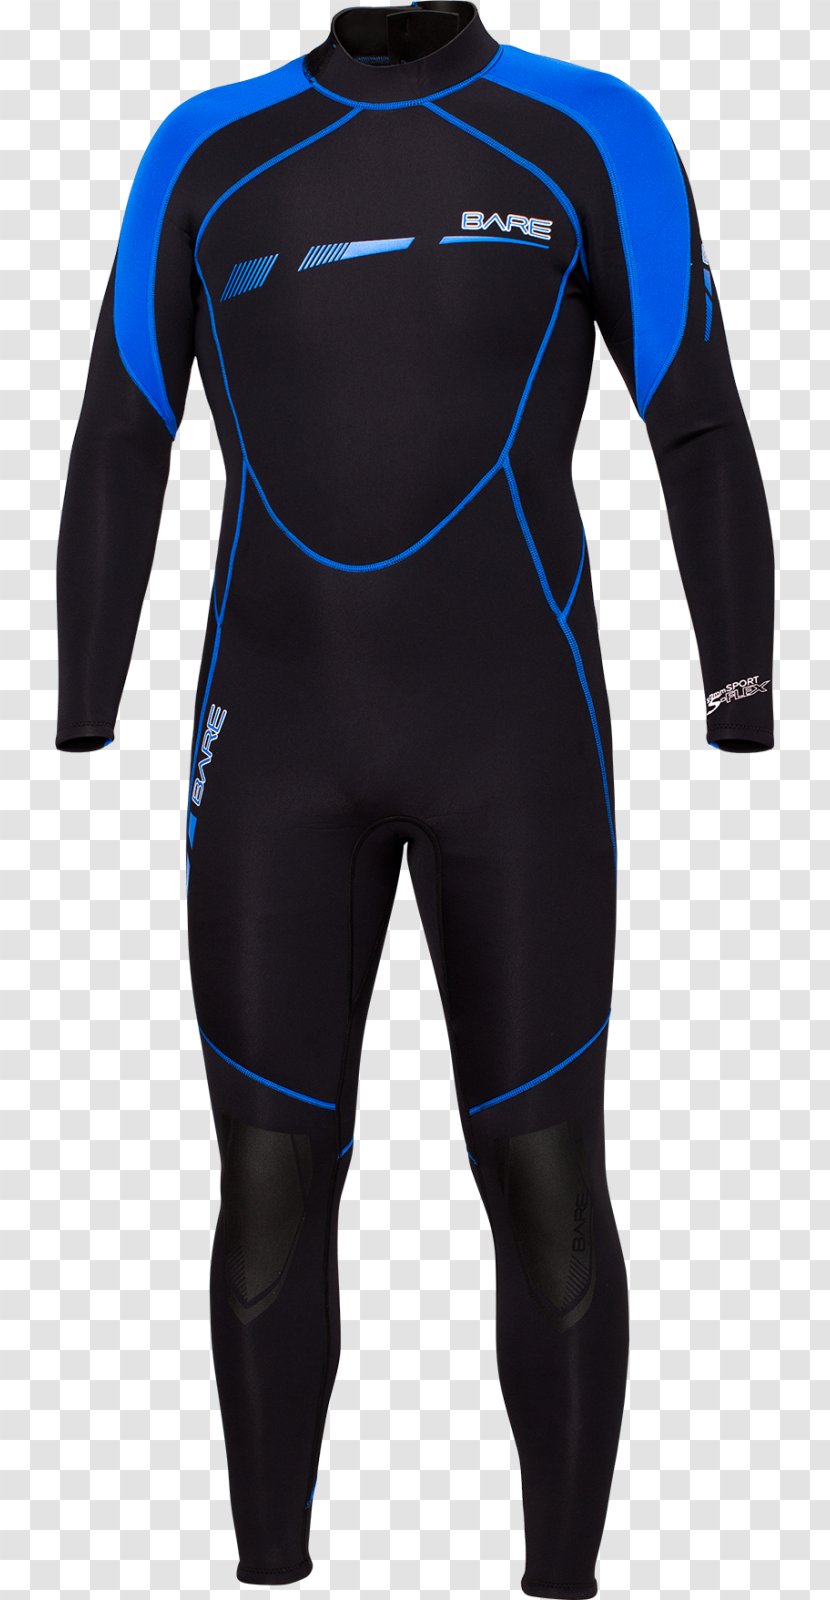 Wetsuit Diving Suit Underwater Scuba Dry - Motorcycle Protective Clothing Transparent PNG